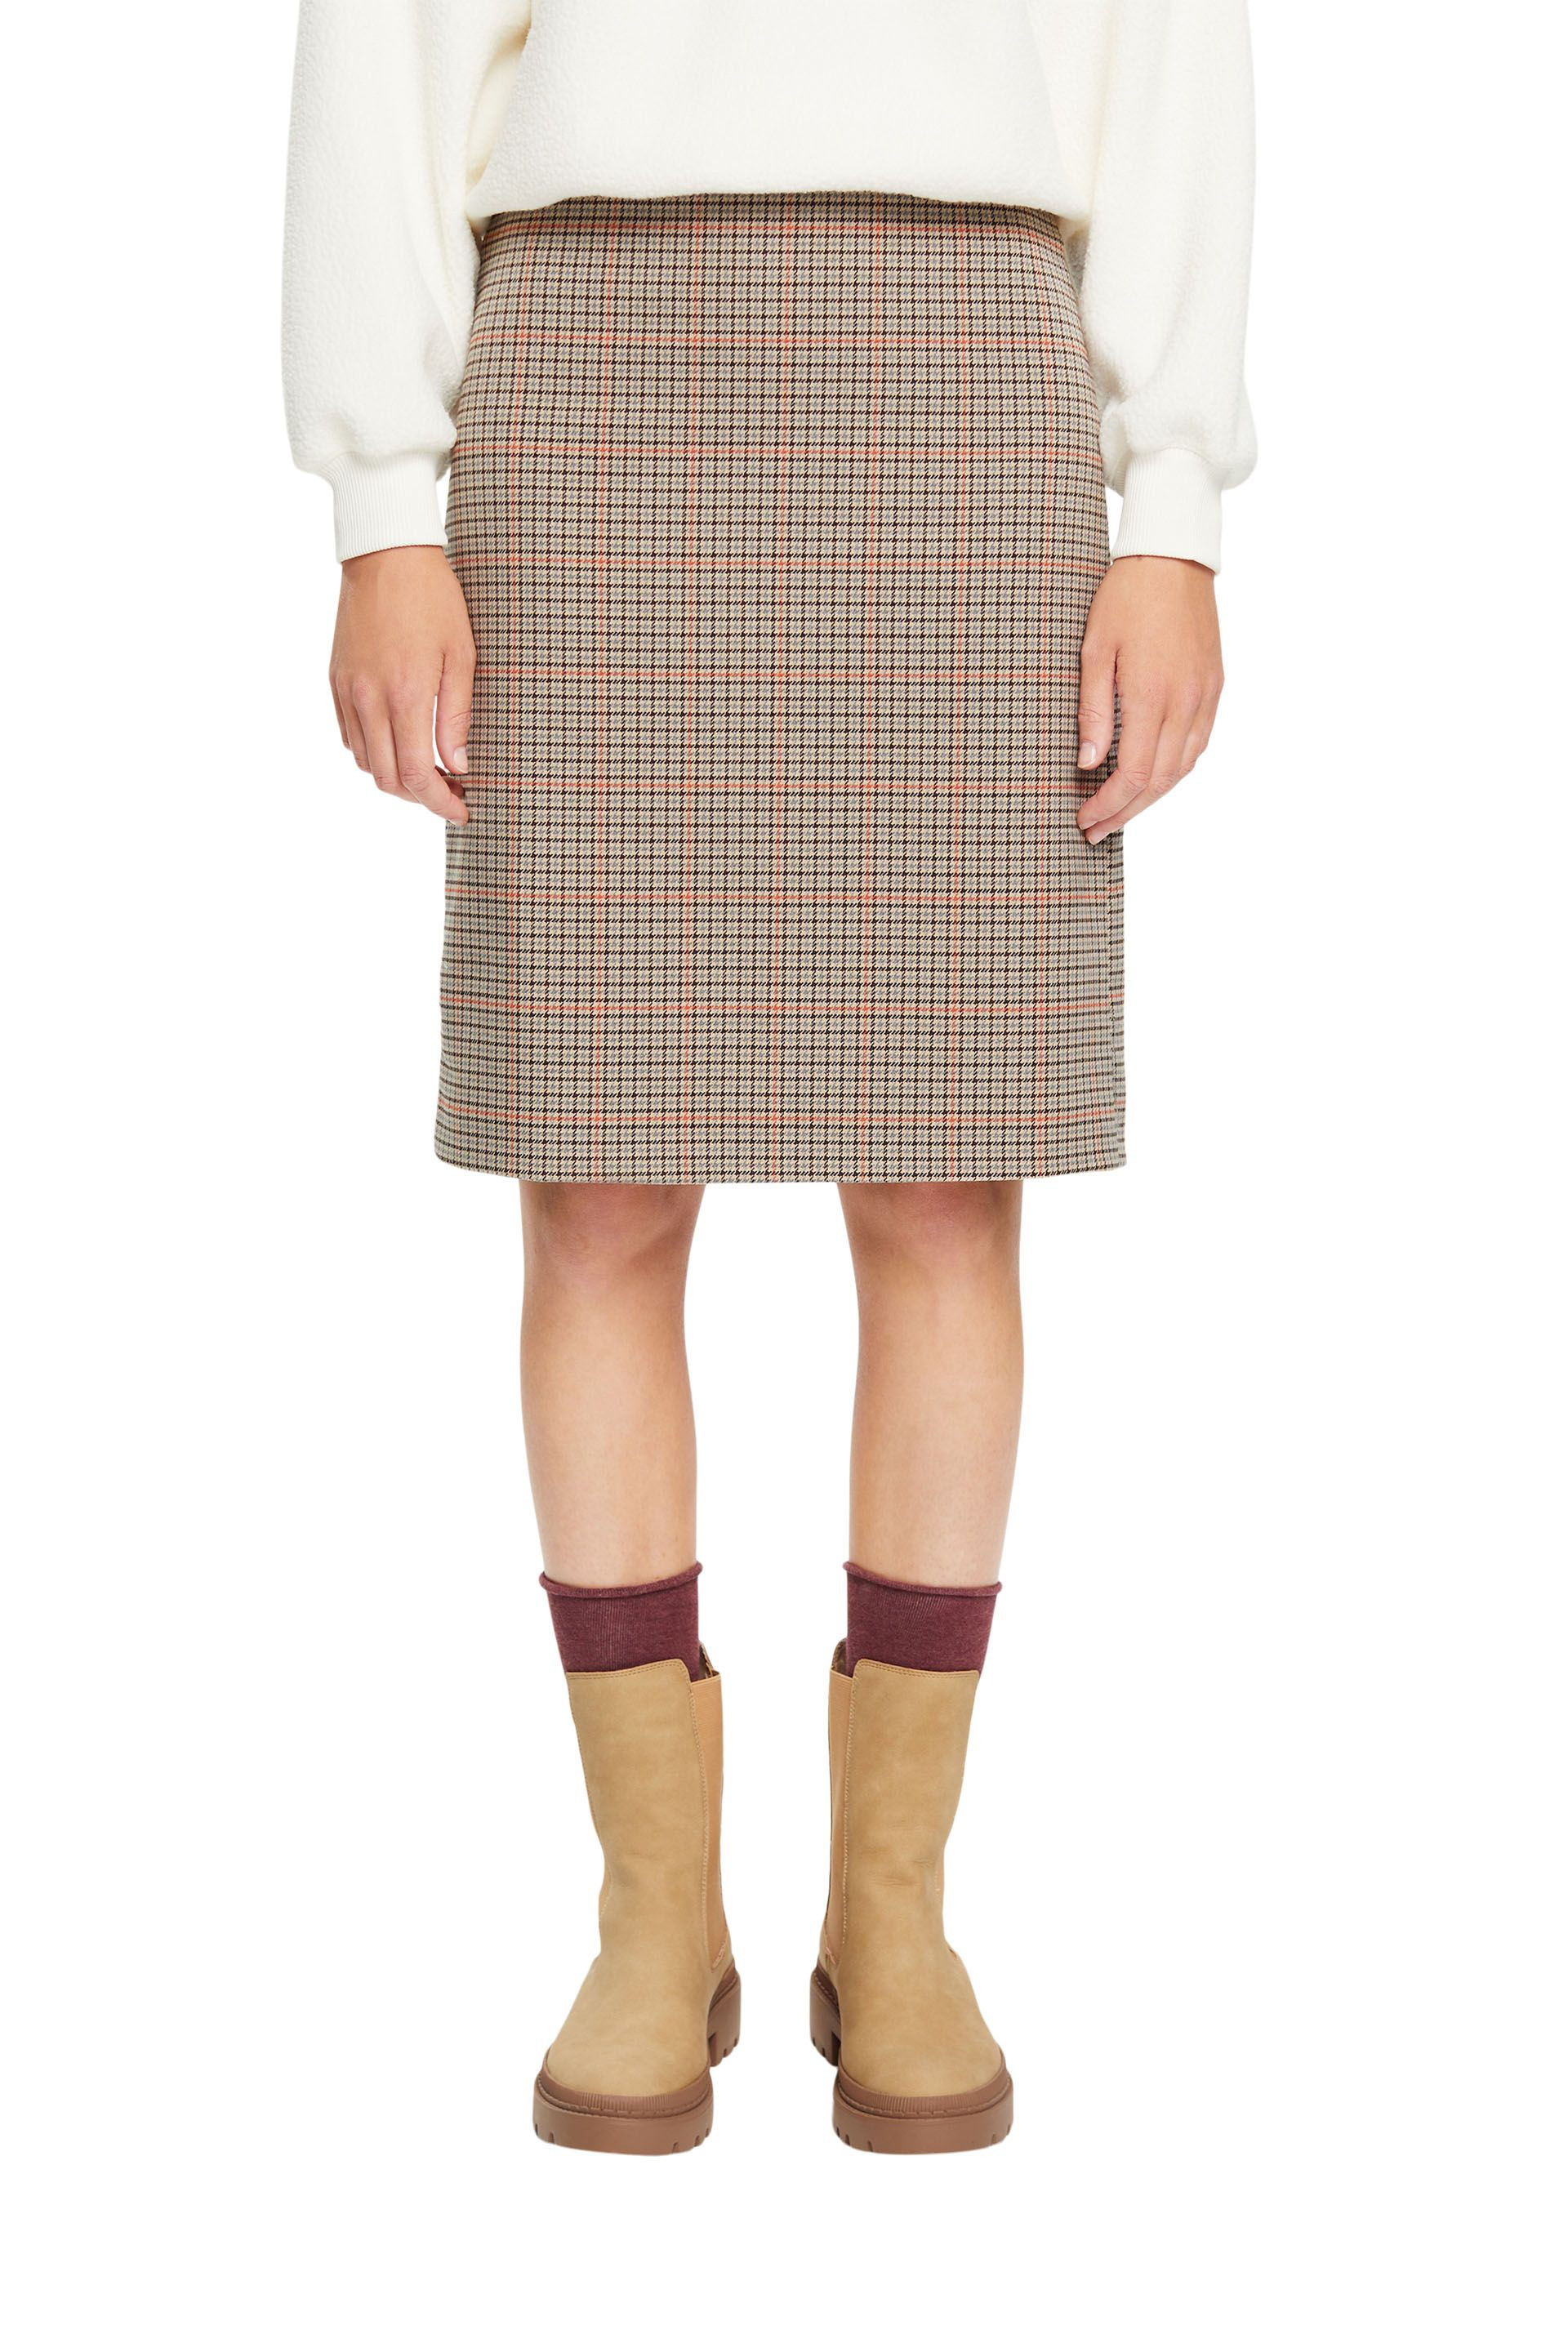 Midi skirt with a check pattern, Beige, large image number 2